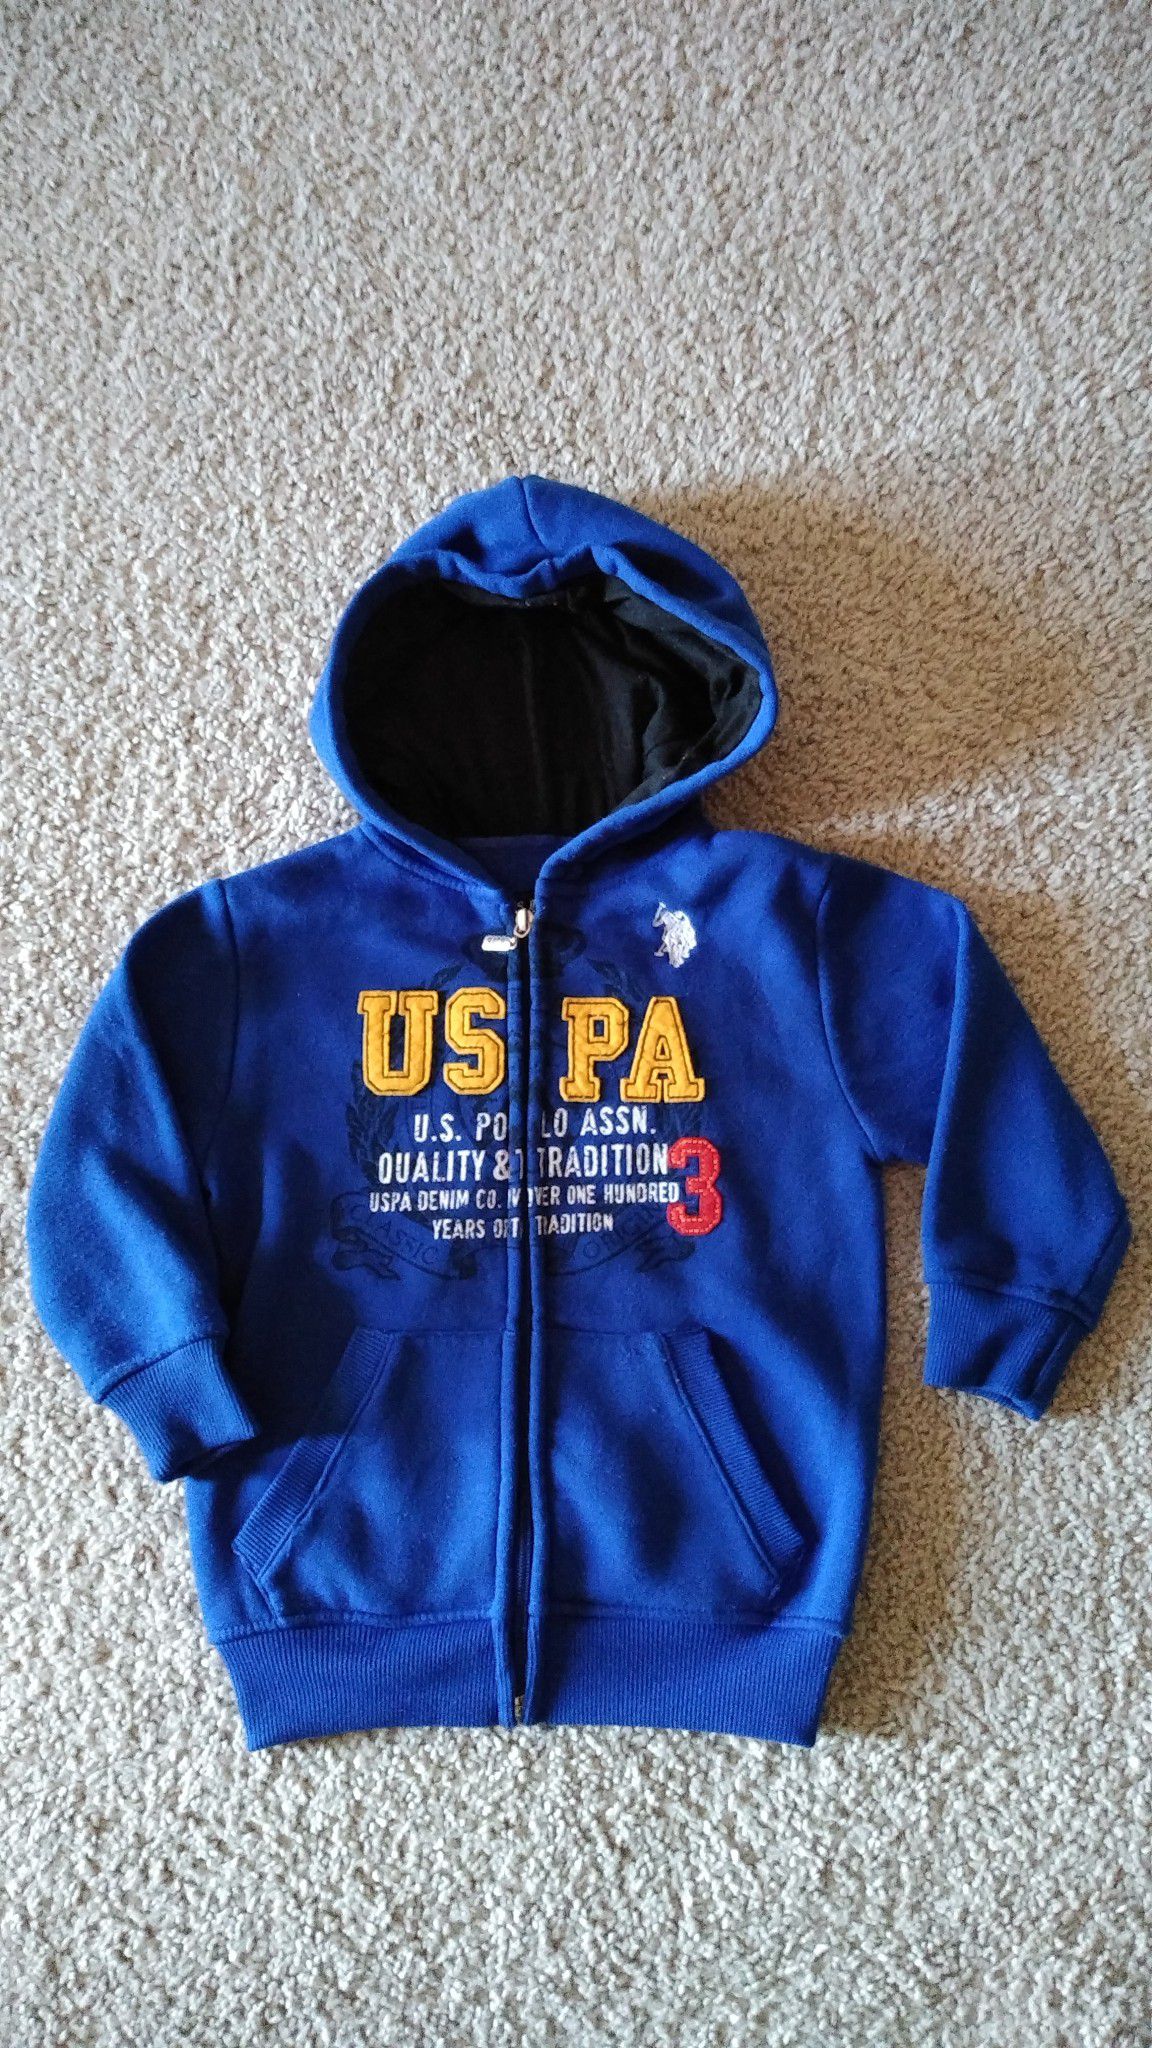 Beautiful U.S. Polo Jacket , toddler size 4 ( excellent condition )